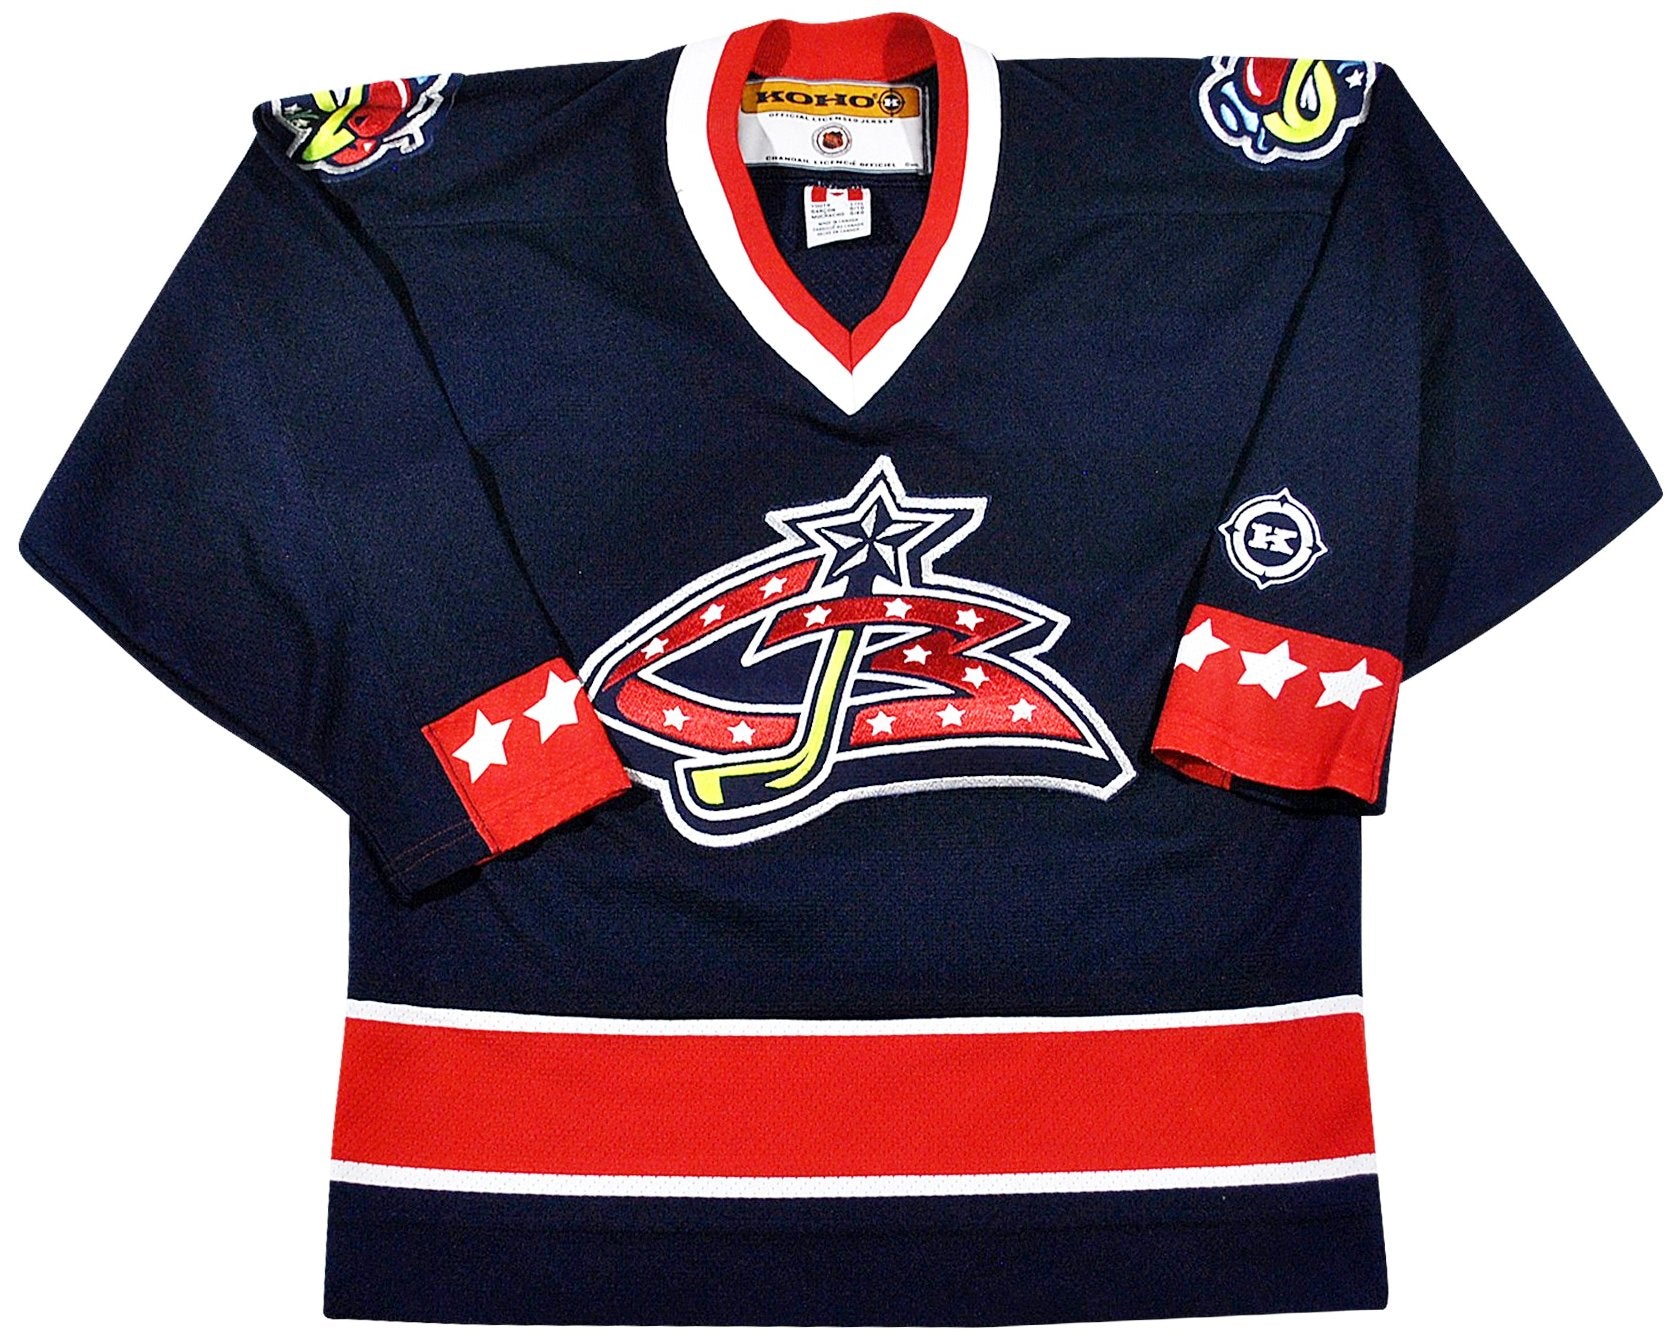 Blue Jackets Inaugural White Used XL CCM Jersey